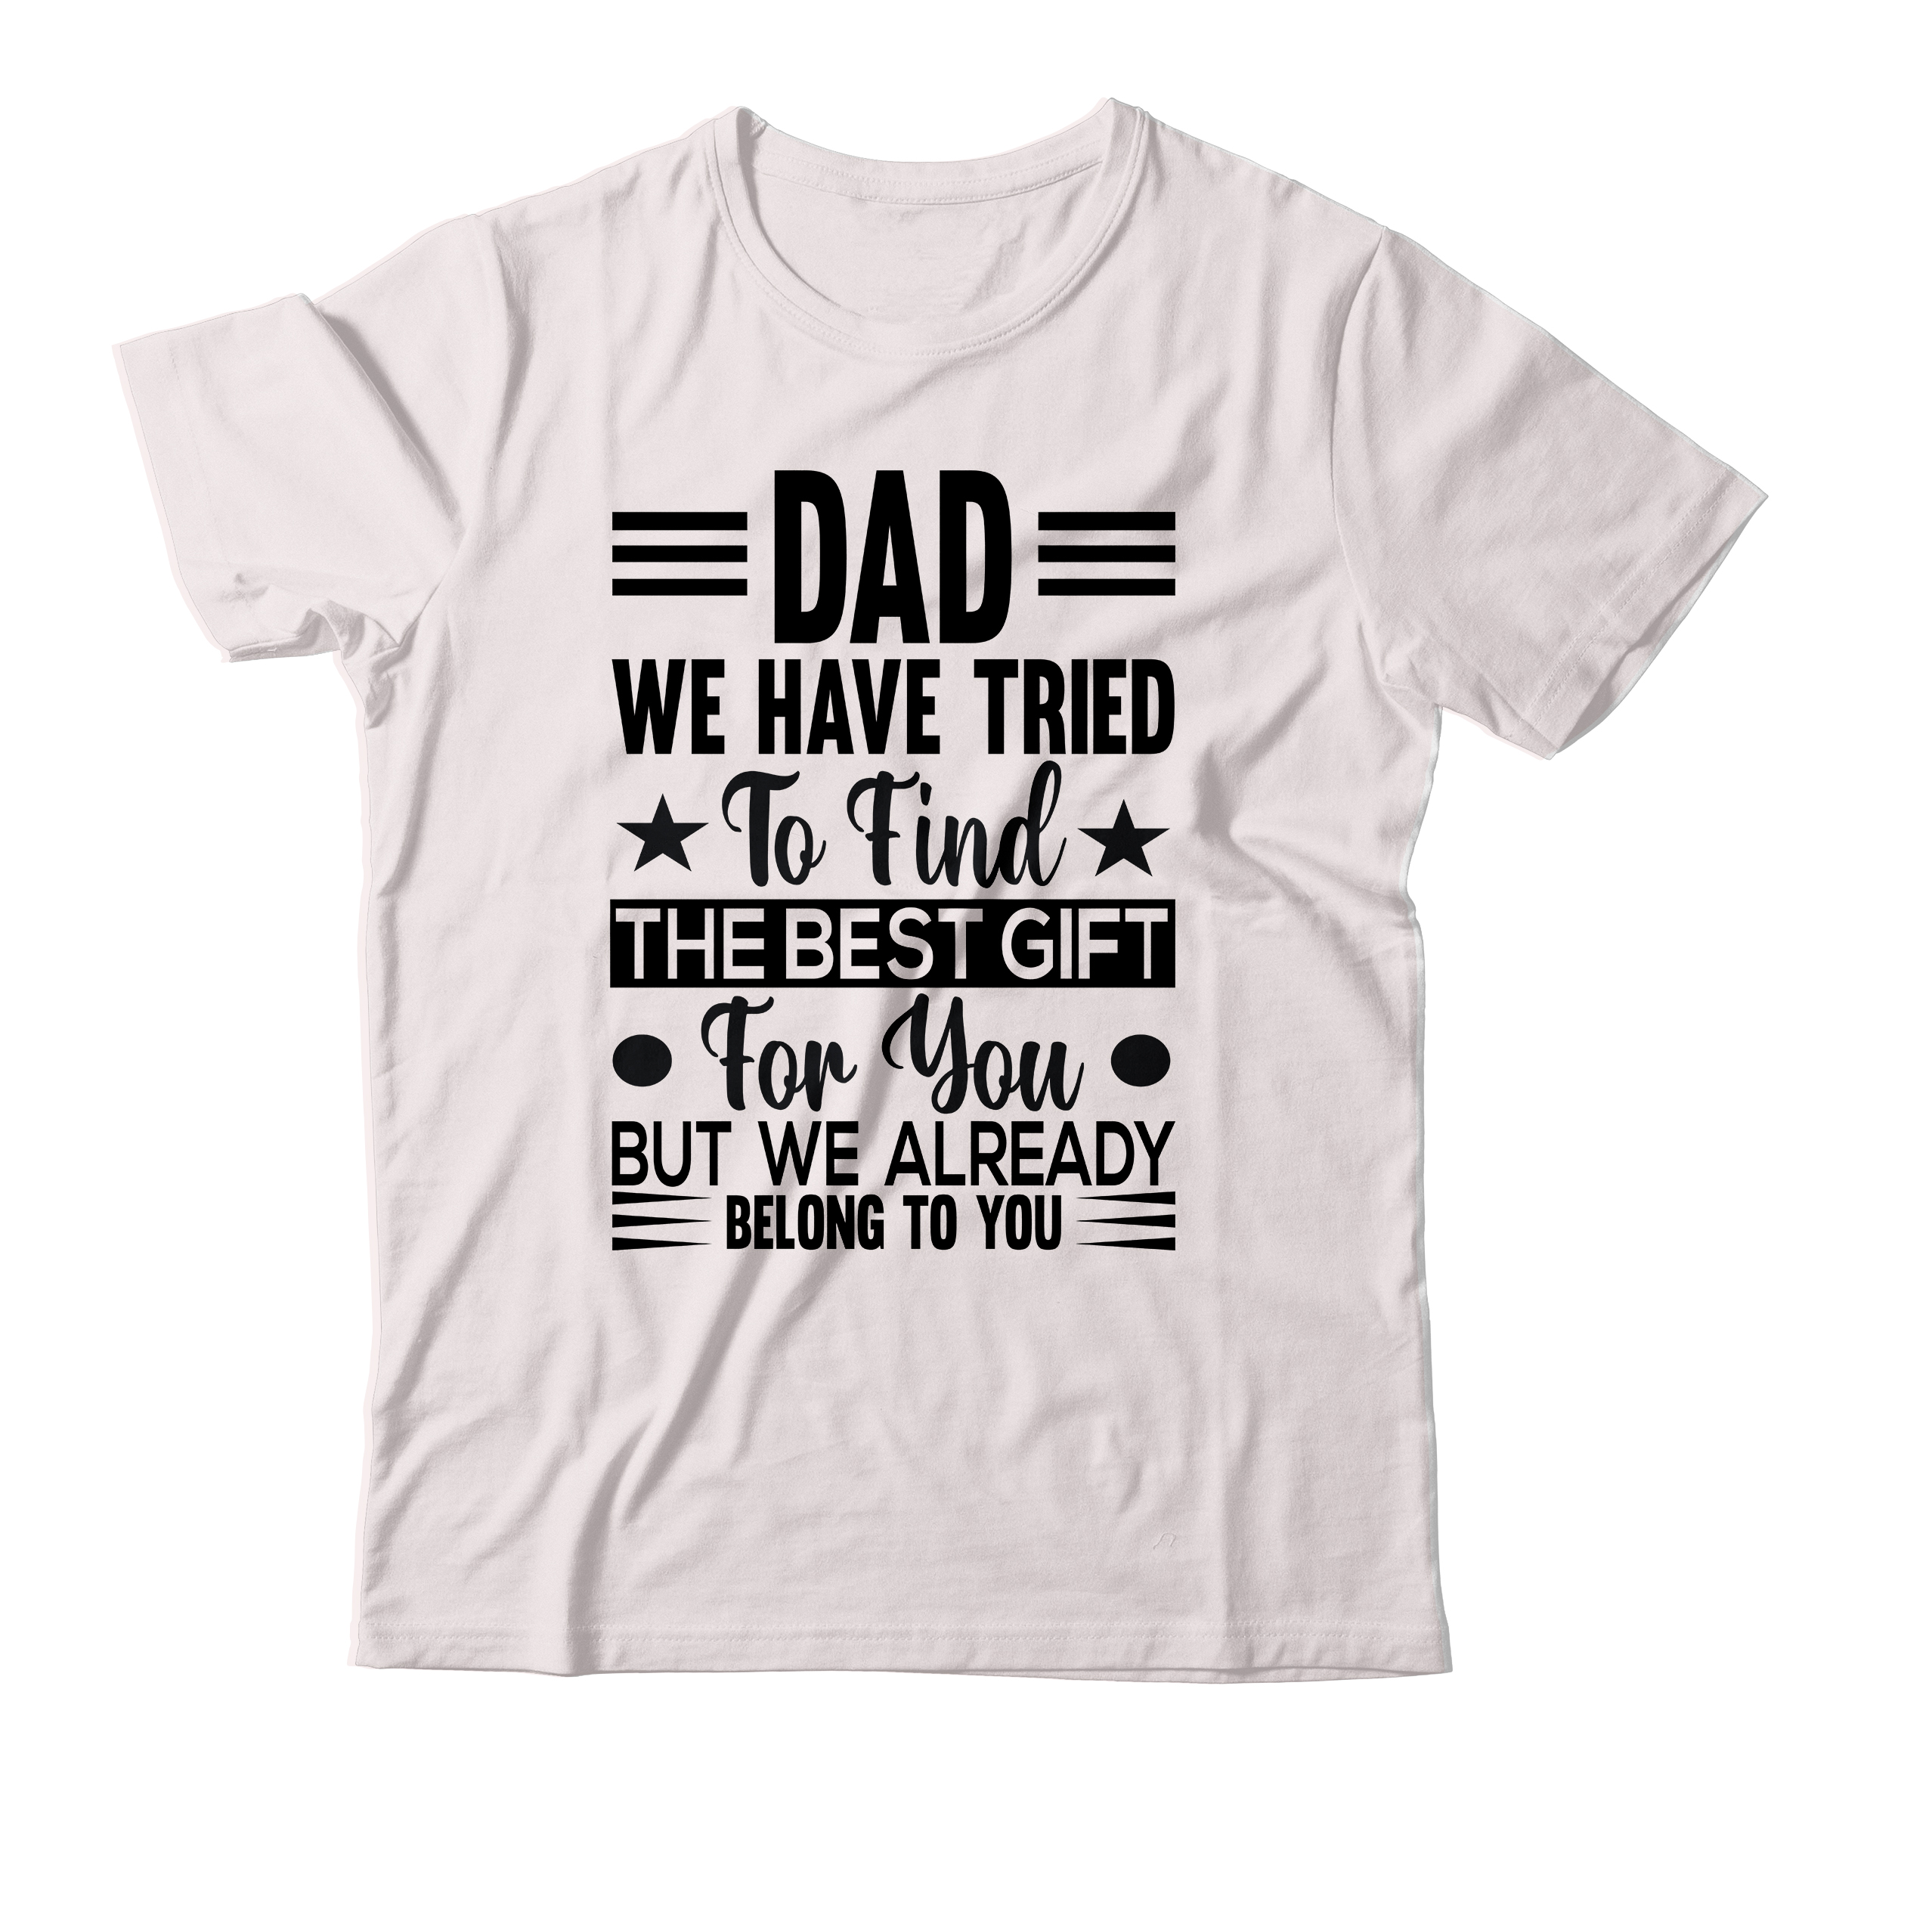 Dad We Have Tried To Find The Best Gift For You But We Already Belong To  You T-shirt Design,birthday gifts for dad christmas gifts for dad dad  fathers day gifts funny dad quotes funny dad sayings father birthday gift  gift for dad from daughter funny fathers ...